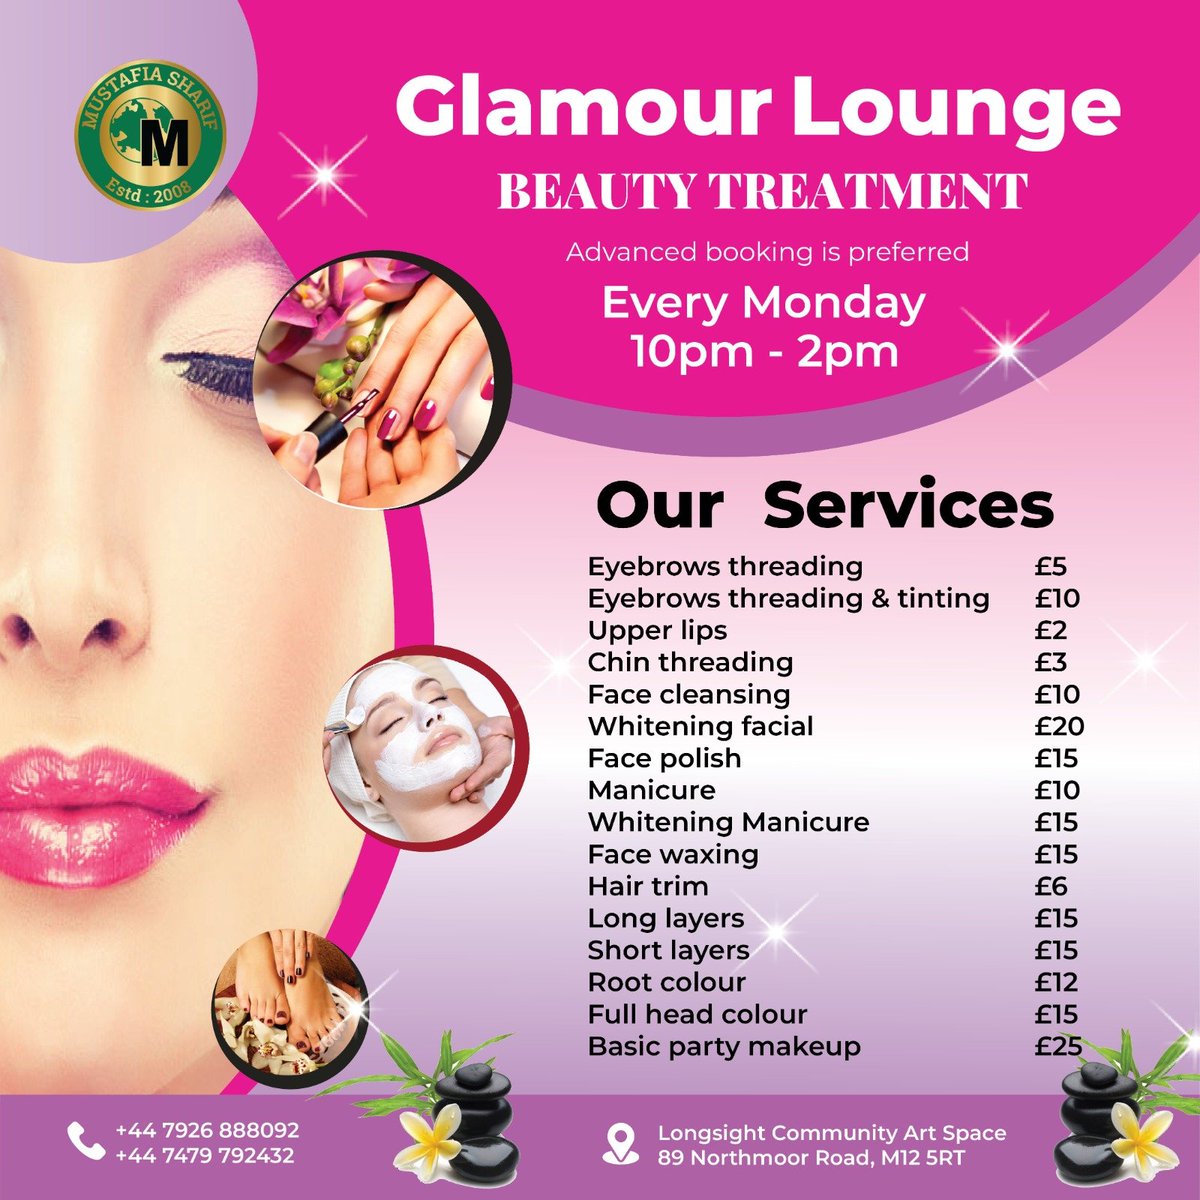 Pamper like royalty every Monday at Longsight Community Art Space! Glamour Lounge offers top beauty services: eyebrow enhancements, manicures & more! Book ahead to treat yourself like the best! #PamperMonday #BeautyTreatment #ManchesterBeauty #SelfCare #GlowUp